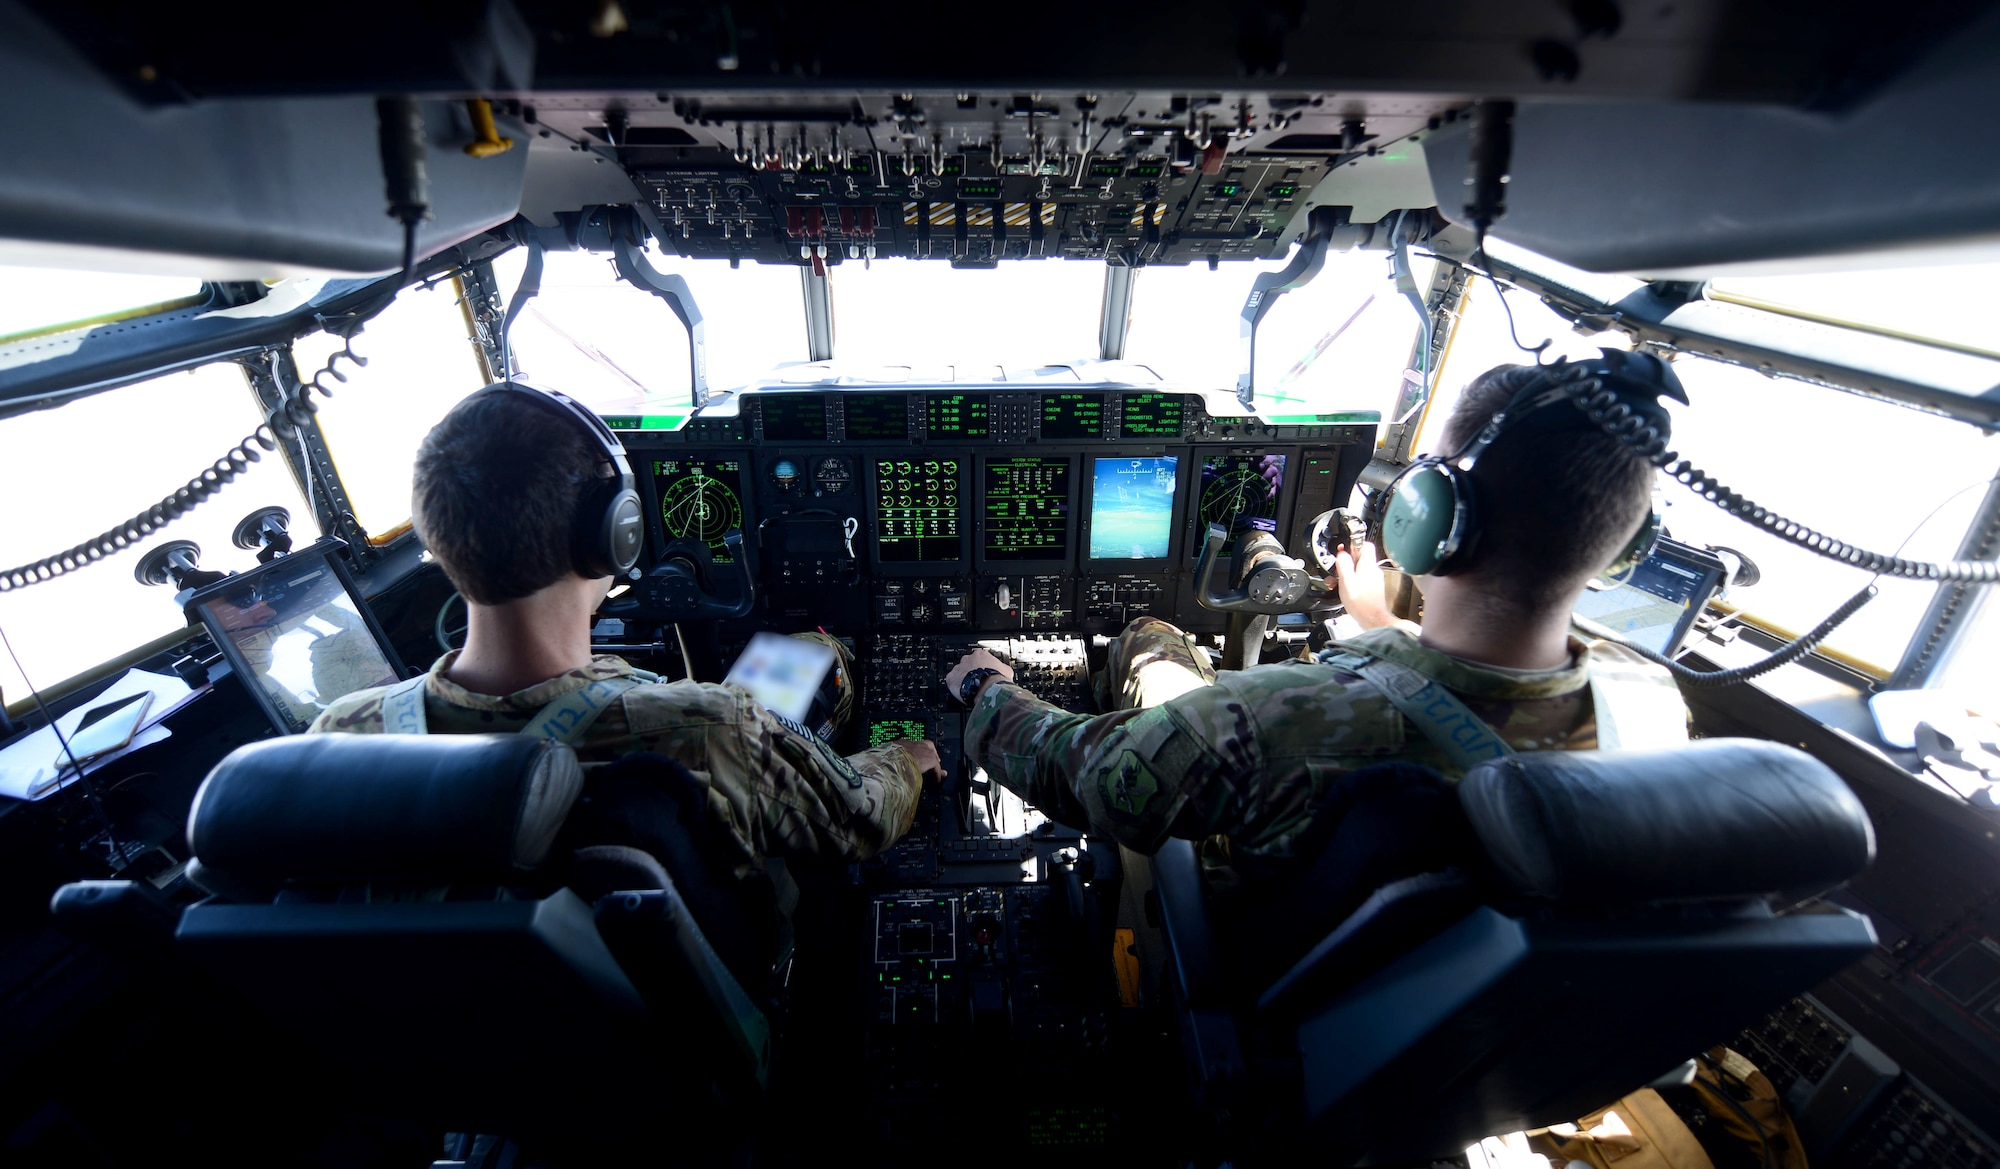 Capts. Carl Price and Chisom Ezeoke, C-130 Super Hercules pilots assigned to the 71st Rescue Squadron, Moody Air Force Base, Ga., fly as part of exercise Combat Raider near Ellsworth AFB, S.D., June 28, 2017. The crew trained with eight other military units in realistic air-to-air, air-to-ground and combat search and rescue missions. (U.S. Air Force photo by Airman 1st Class Donald C. Knechtel)